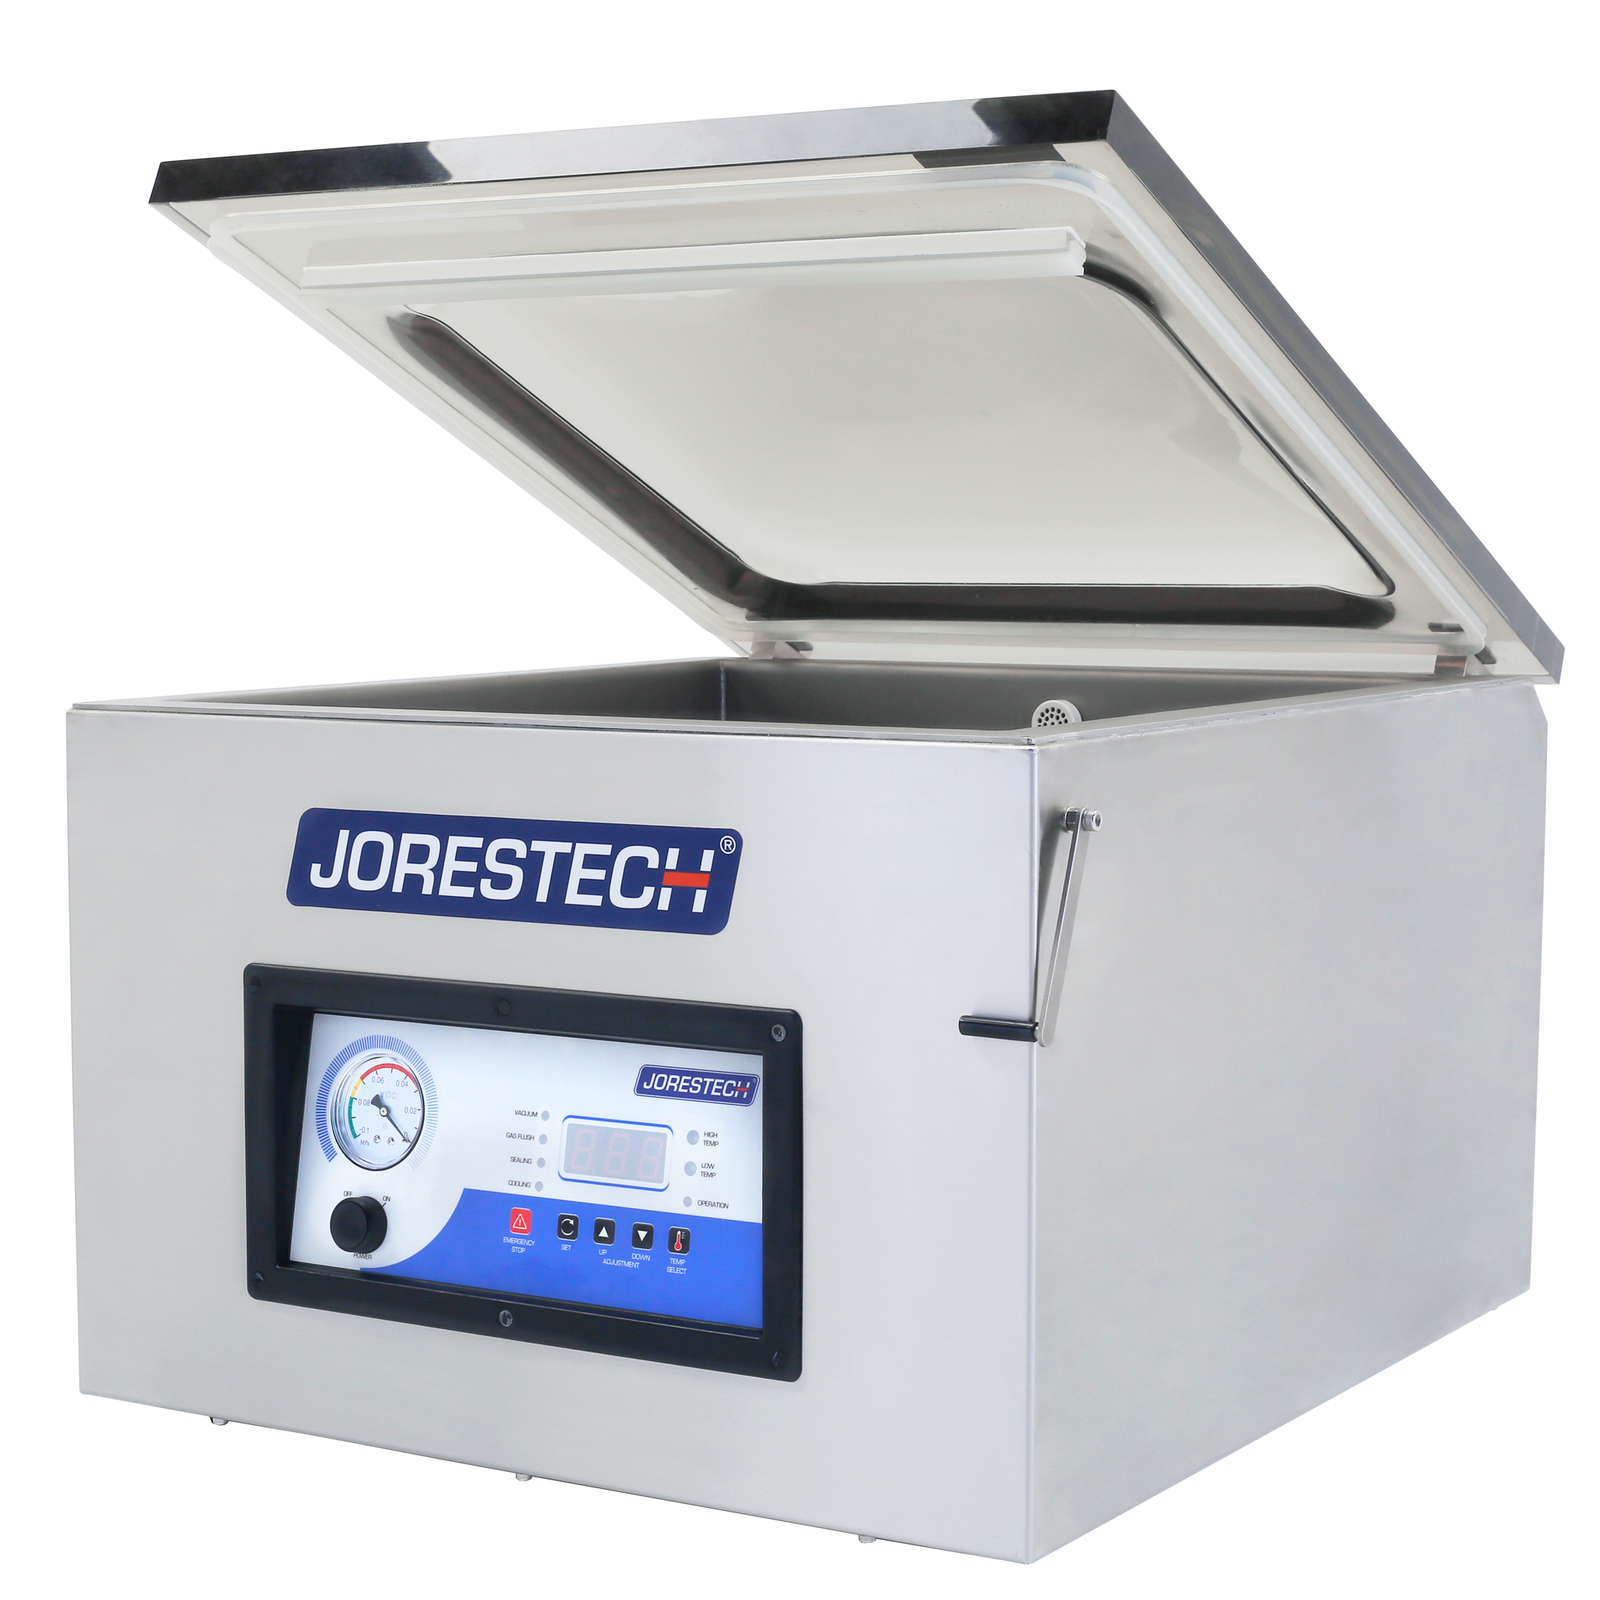 Side of the stainless steel JORES TECHNOLOGIES® tabletop single chamber vacuum sealing machine